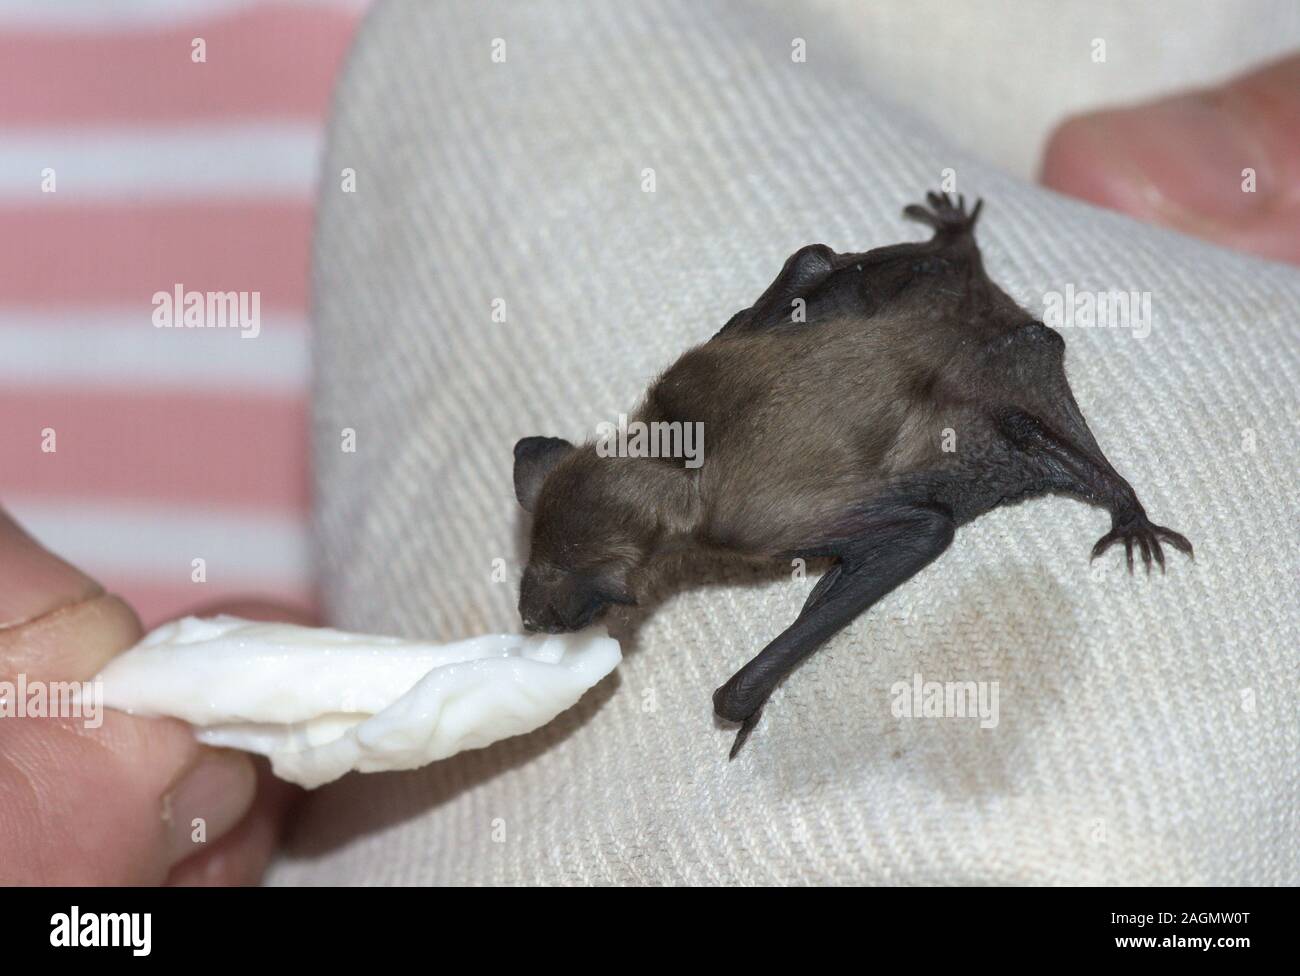 Bat.Common Pipistrelle 'Pipistrellus pipistrellus' Young animal being hand reared after falling from a roost.South-west France. Stock Photo